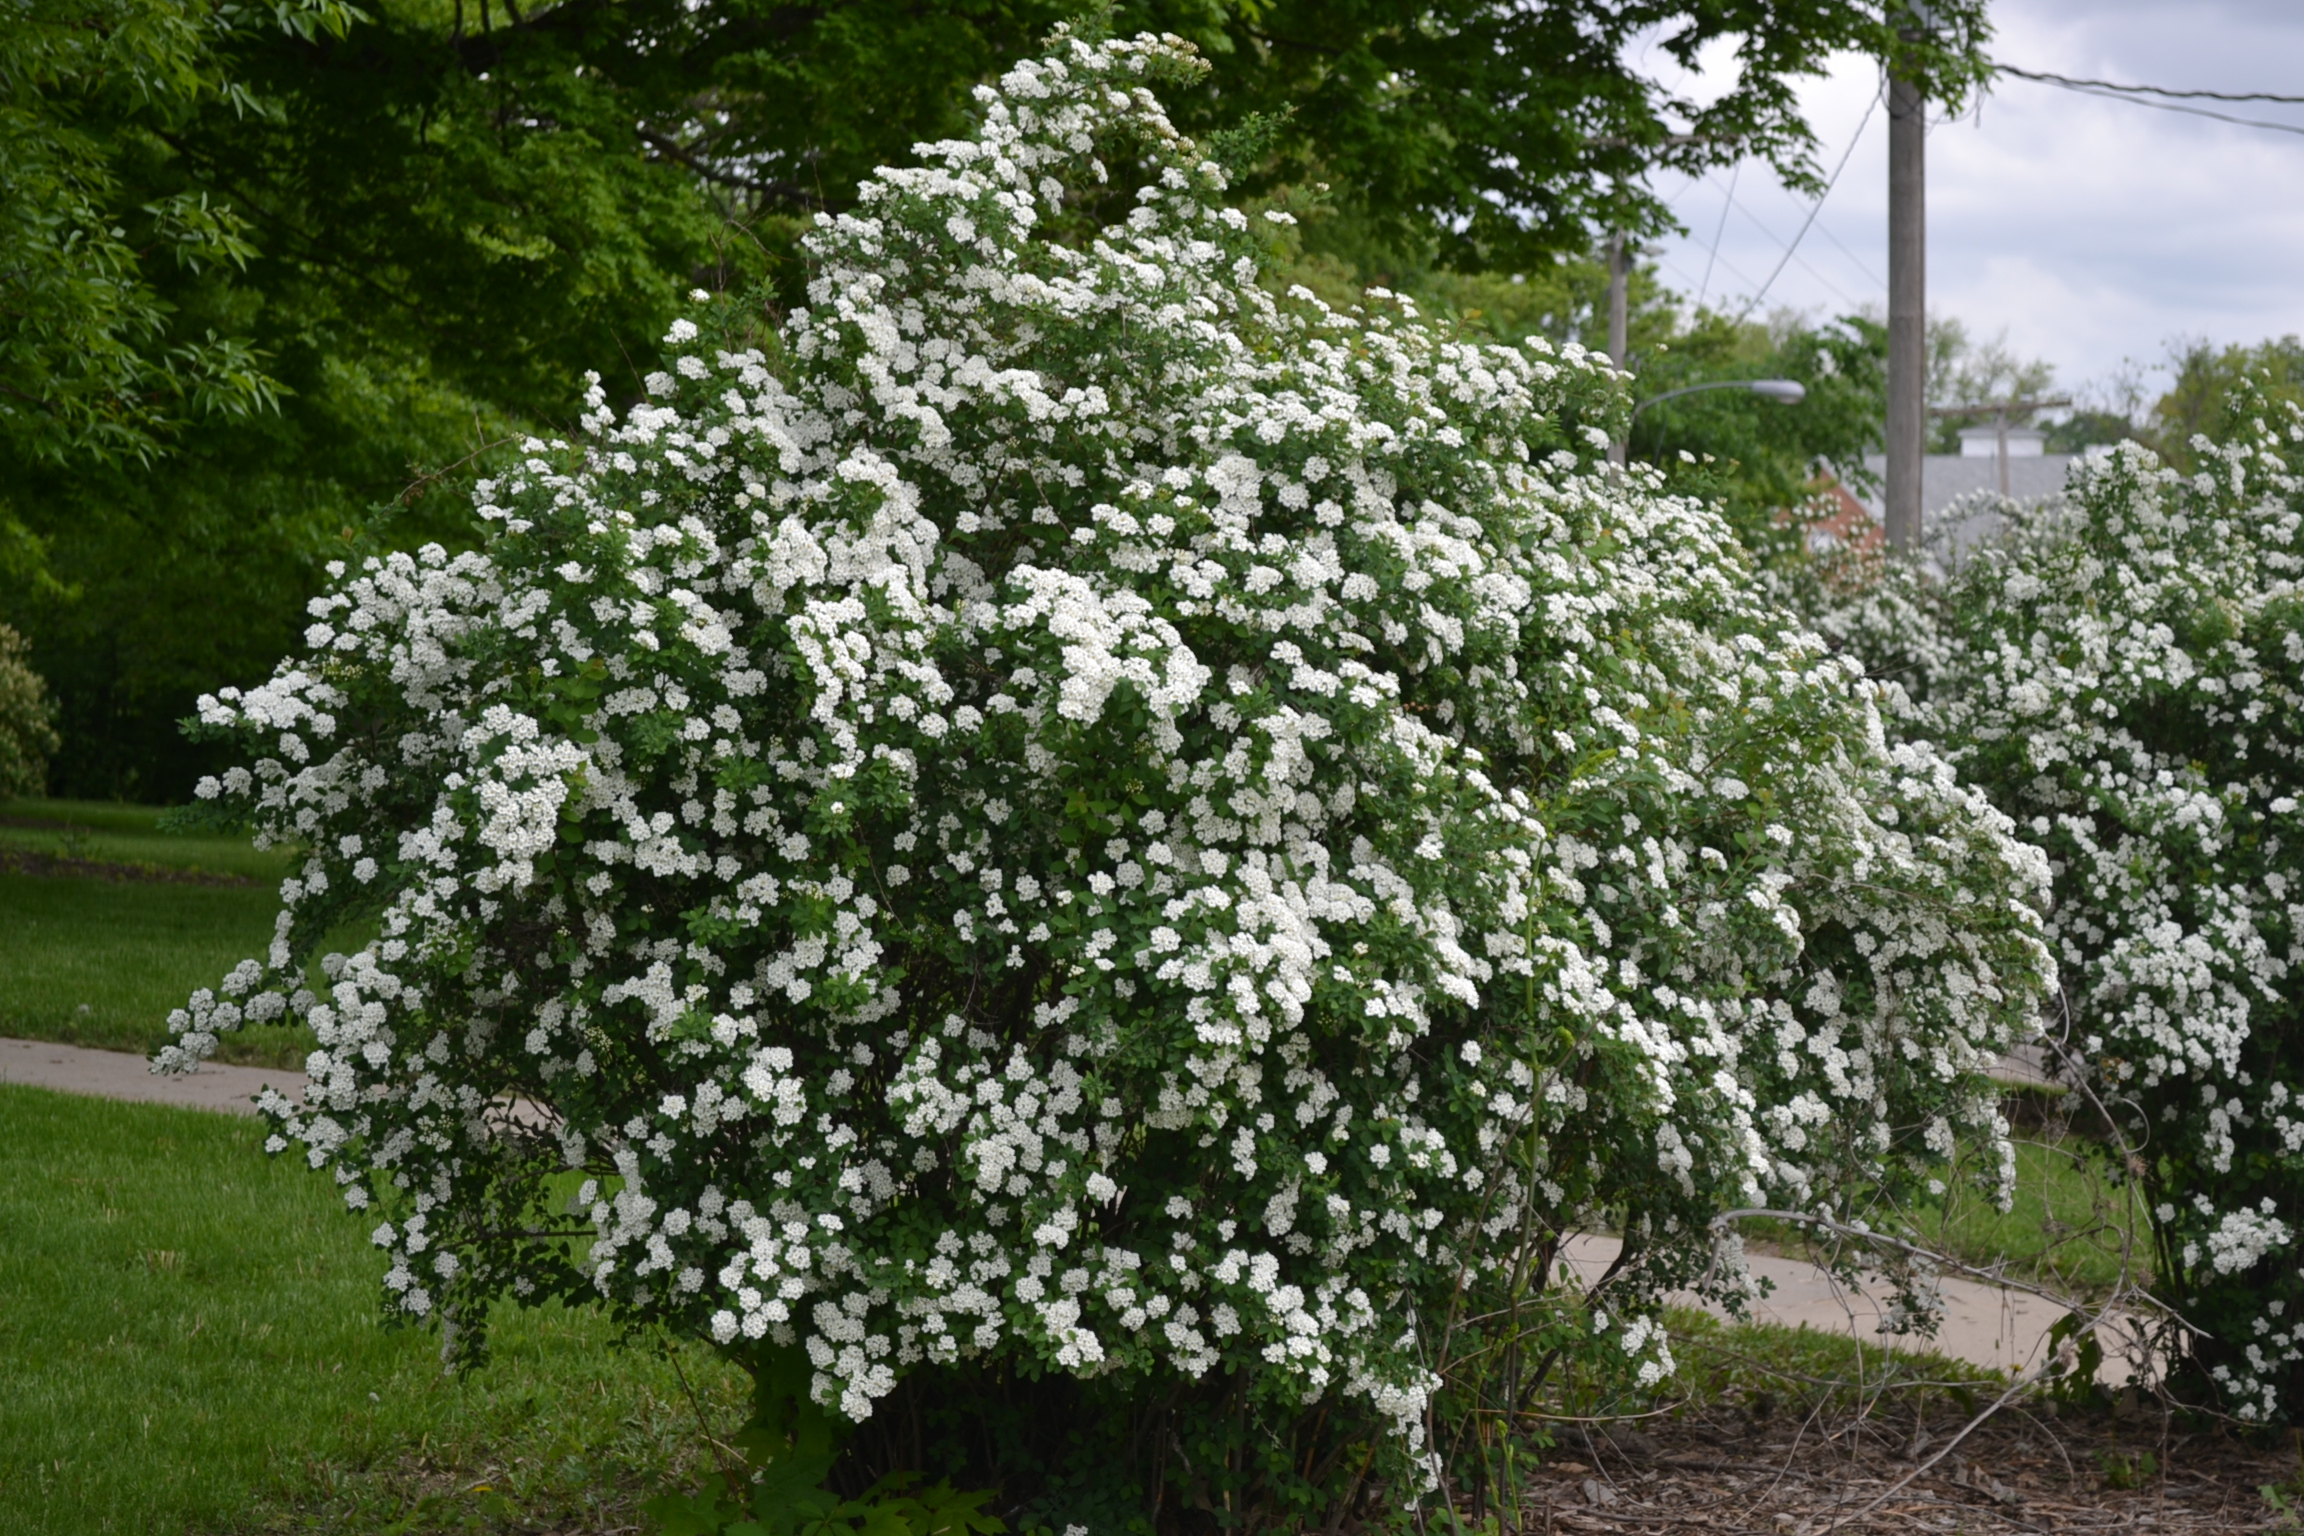 Snowmound Spirea is a late spring to early summer flowering shrub.